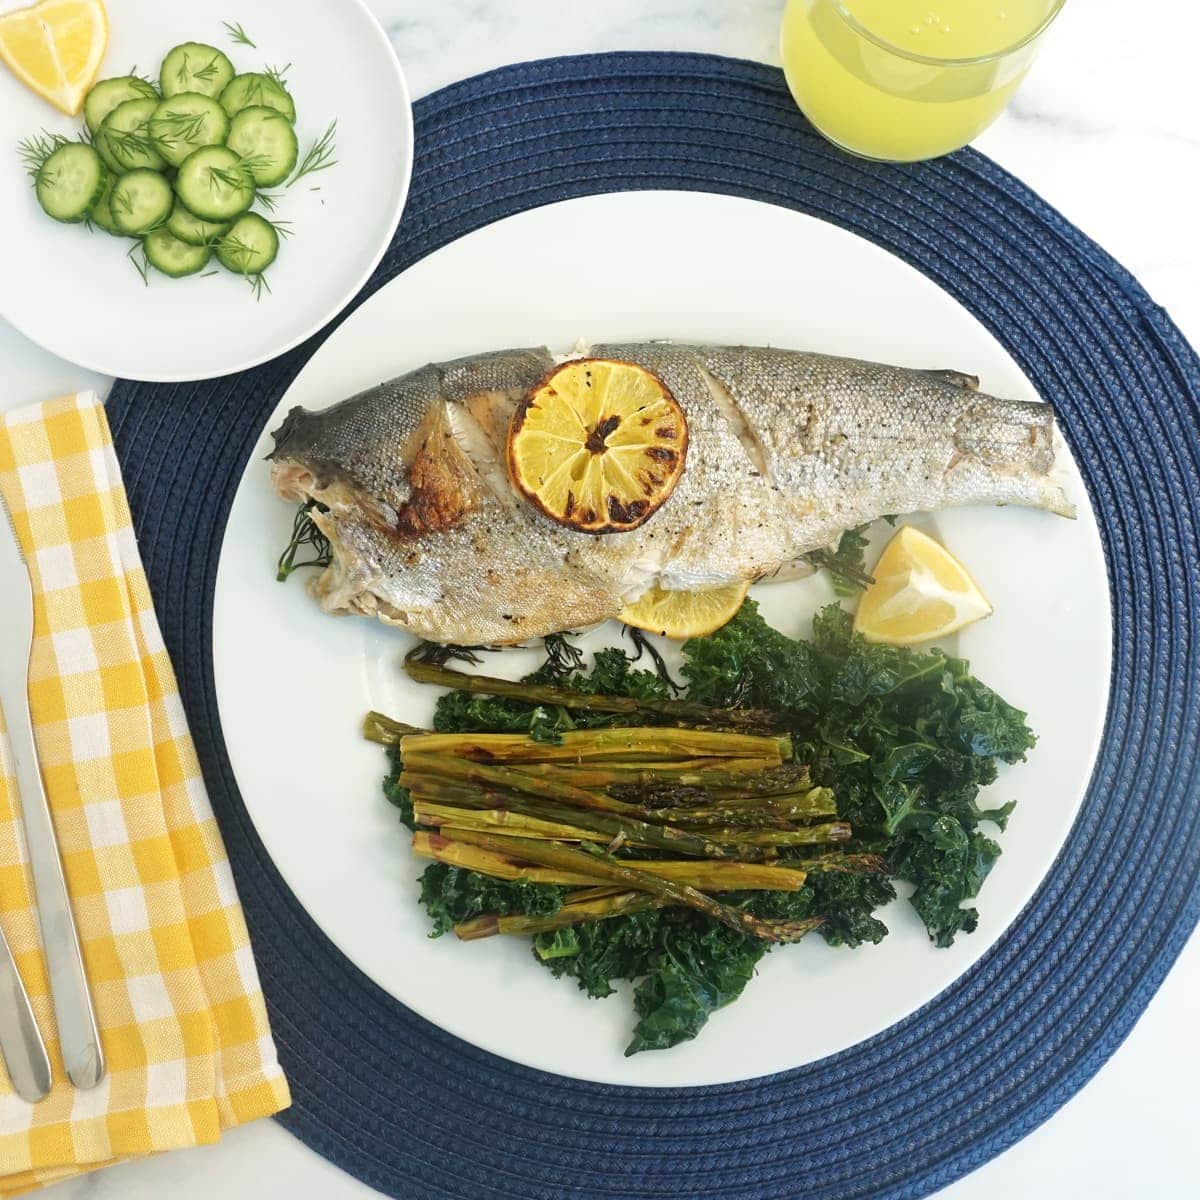 Plate of whole trout and kale and asparagus